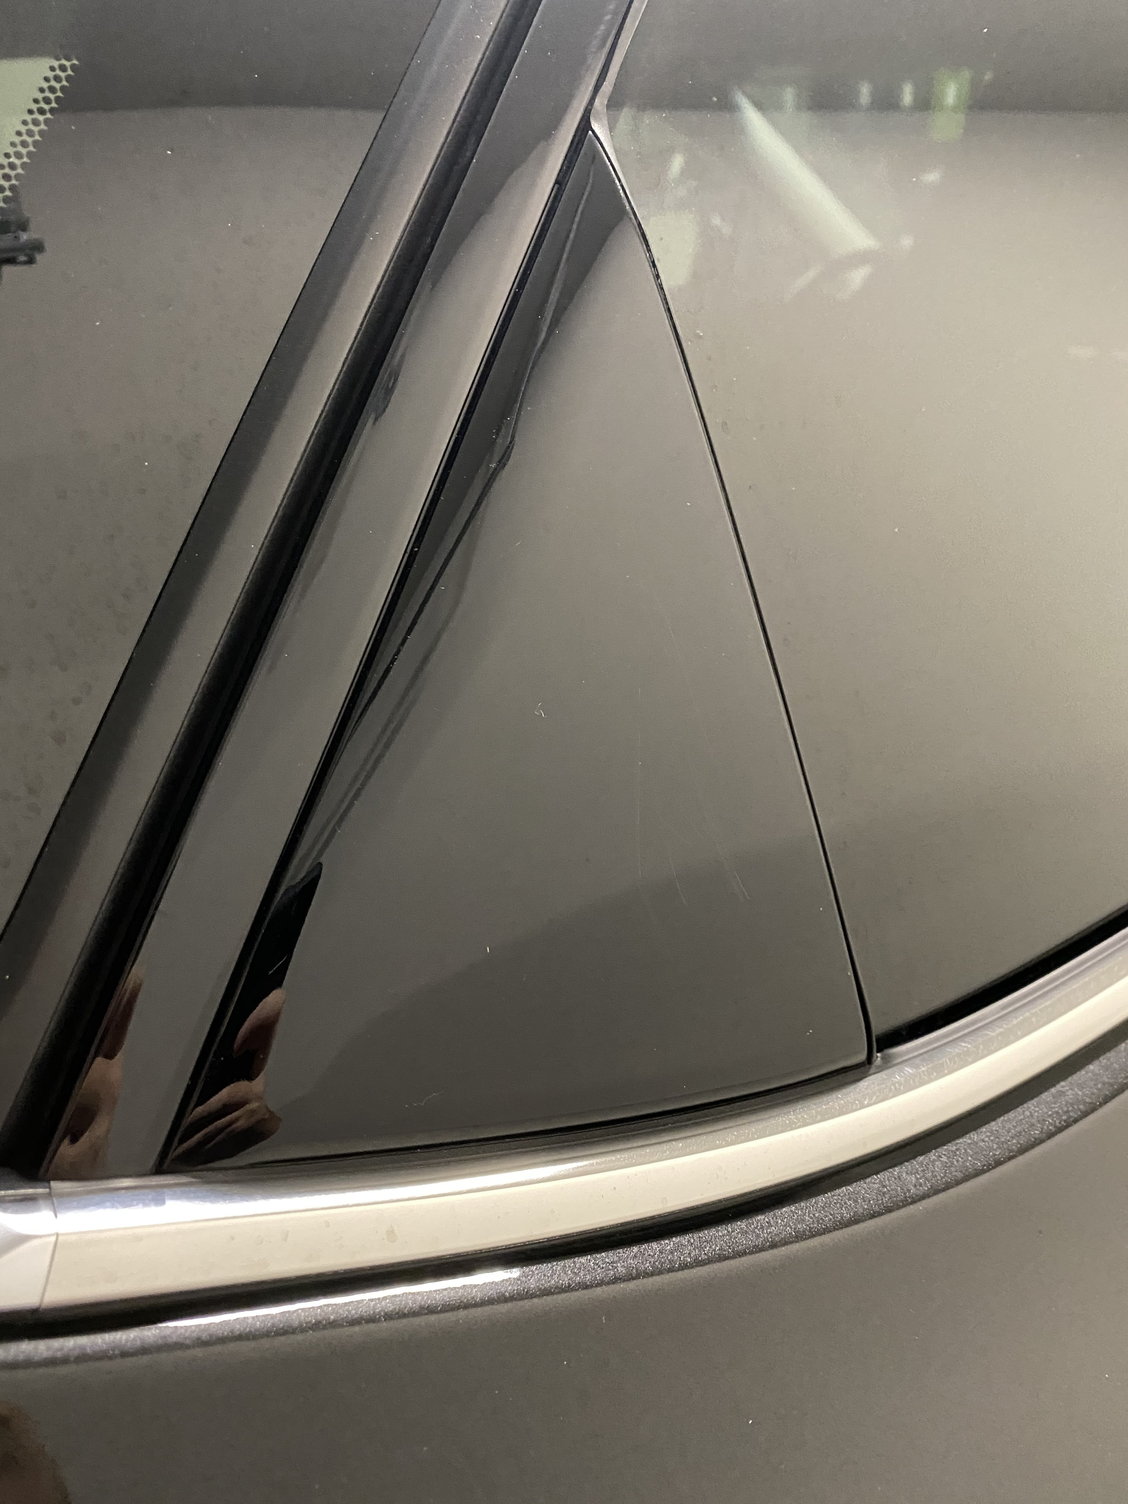 2016 RX350 - Scratched Back Middle Panel - ClubLexus ...